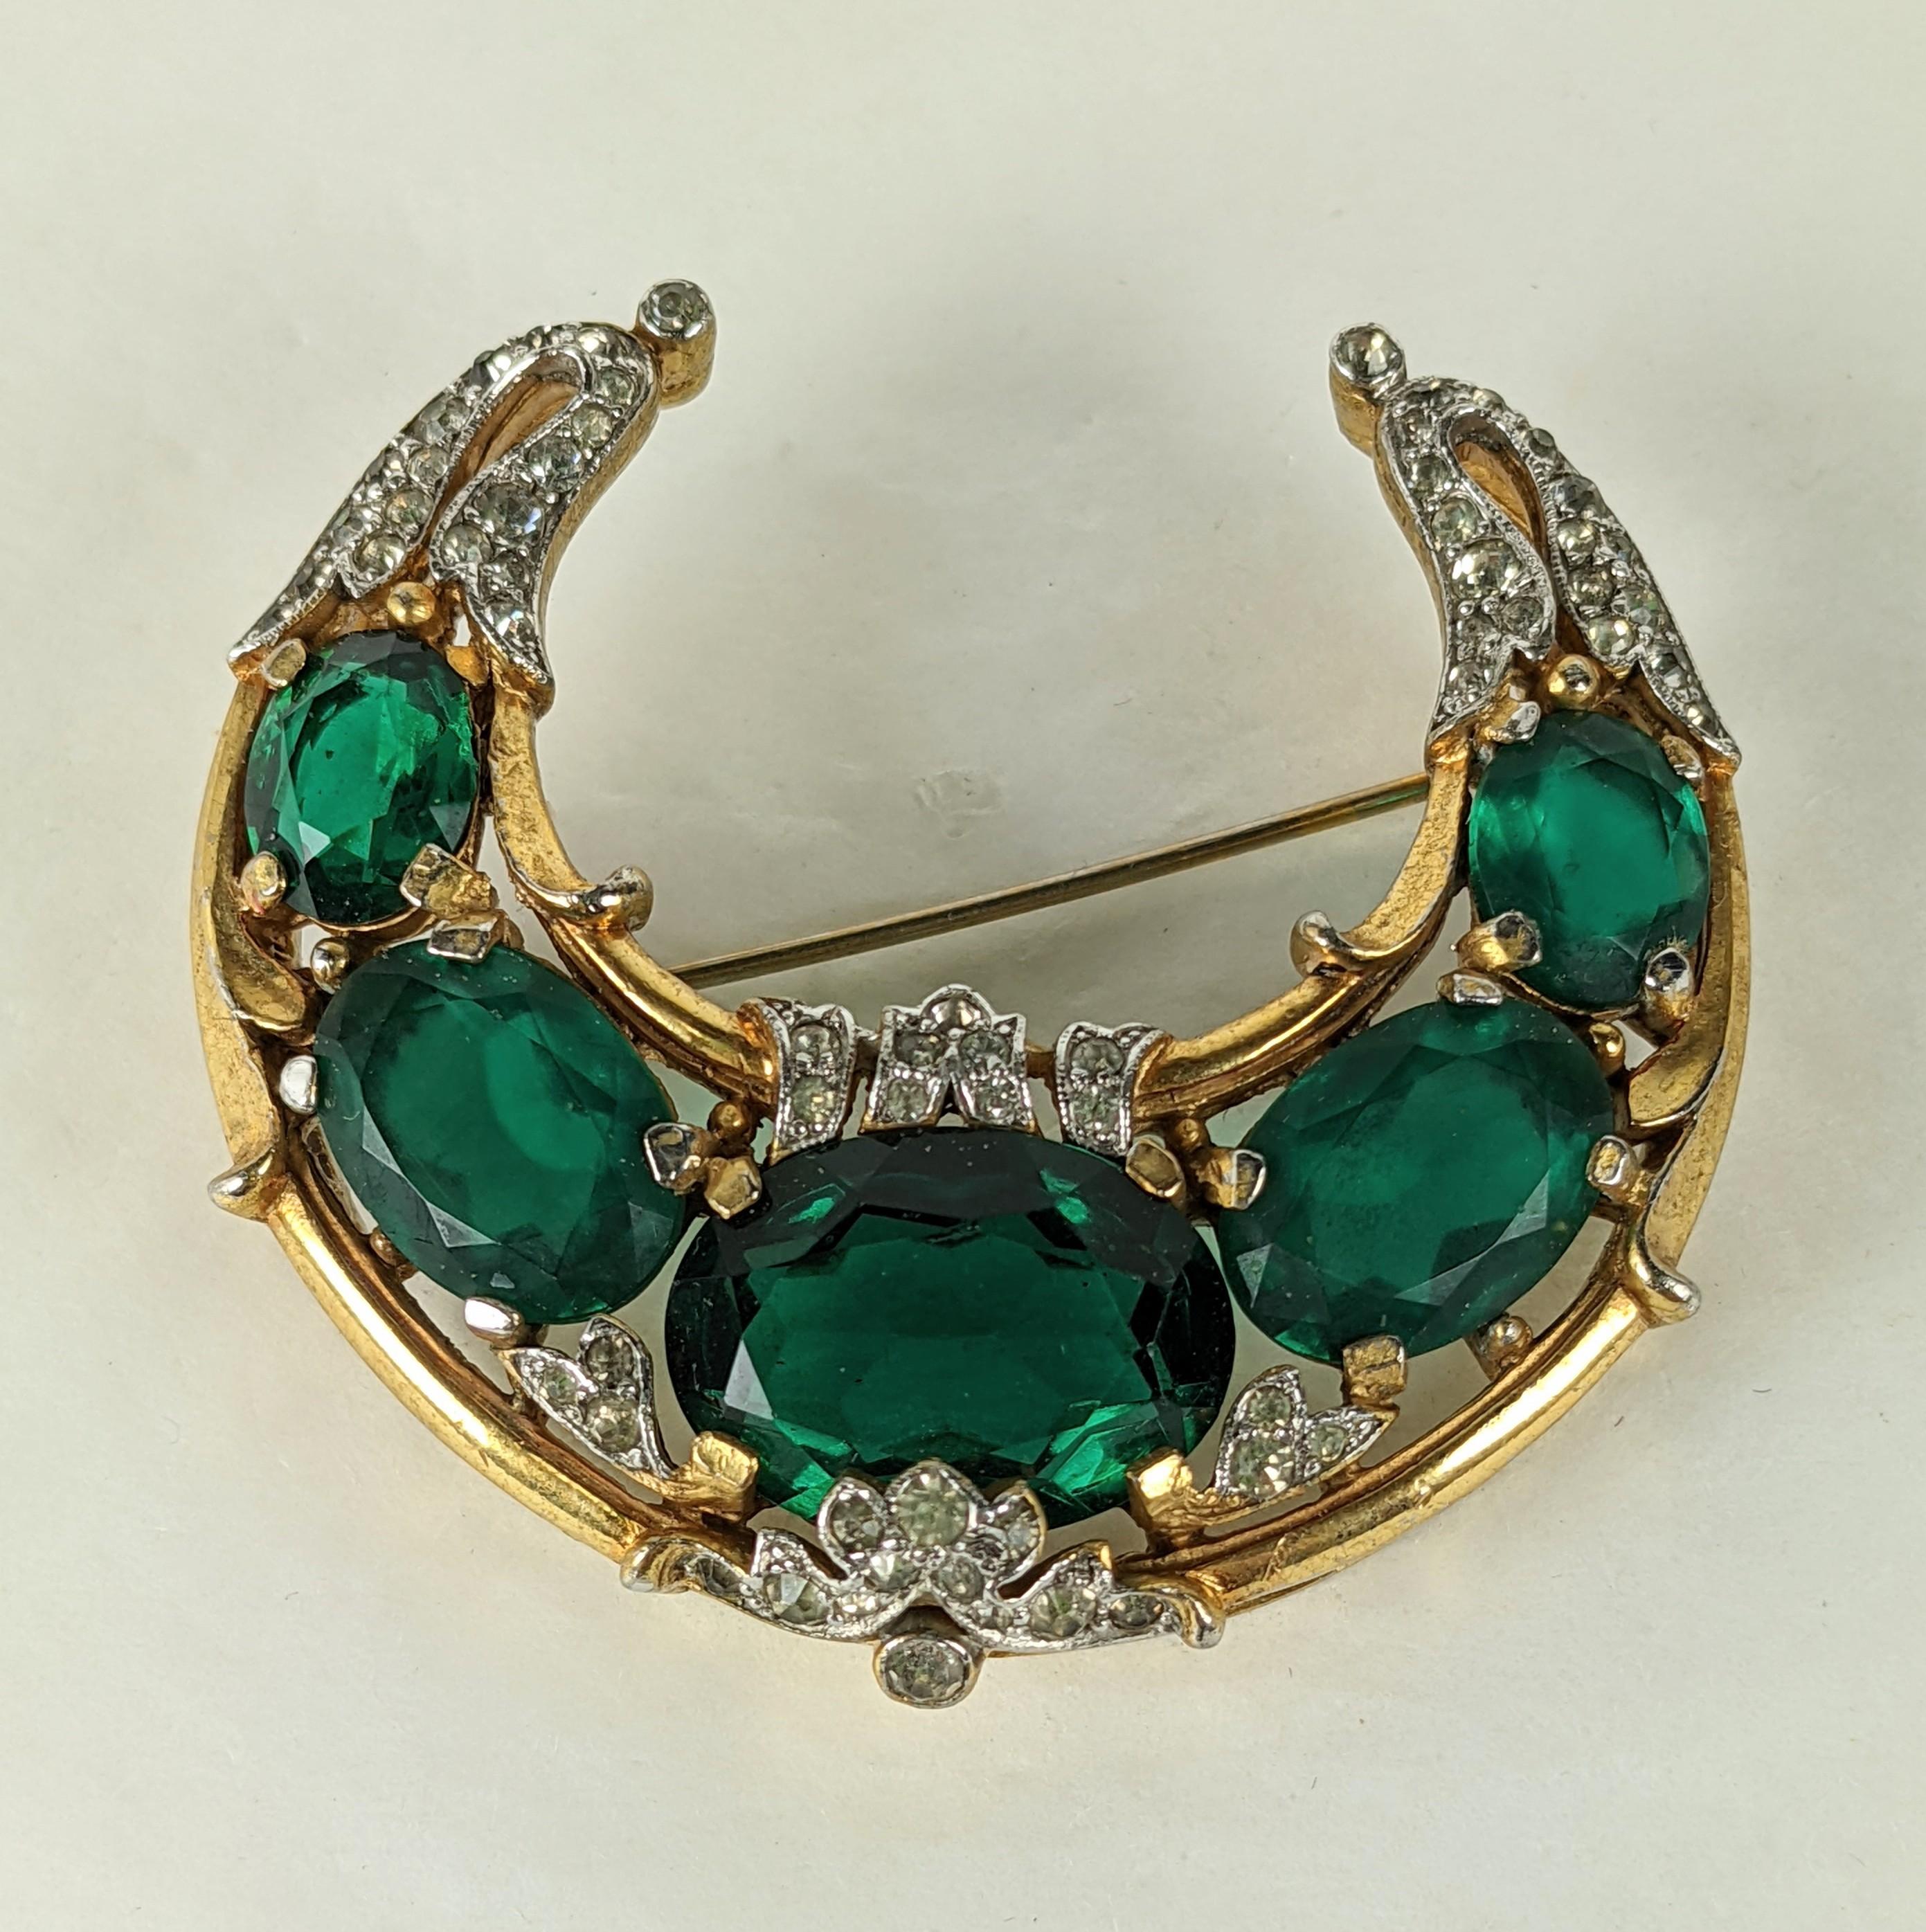 Trifari Empress Eugenie Series Half Moon Crescent Brooch from the 1940's. Half moon design with graduated oval emerald pastes with pave crystal accents by Alfred Phillipe.  Marked 